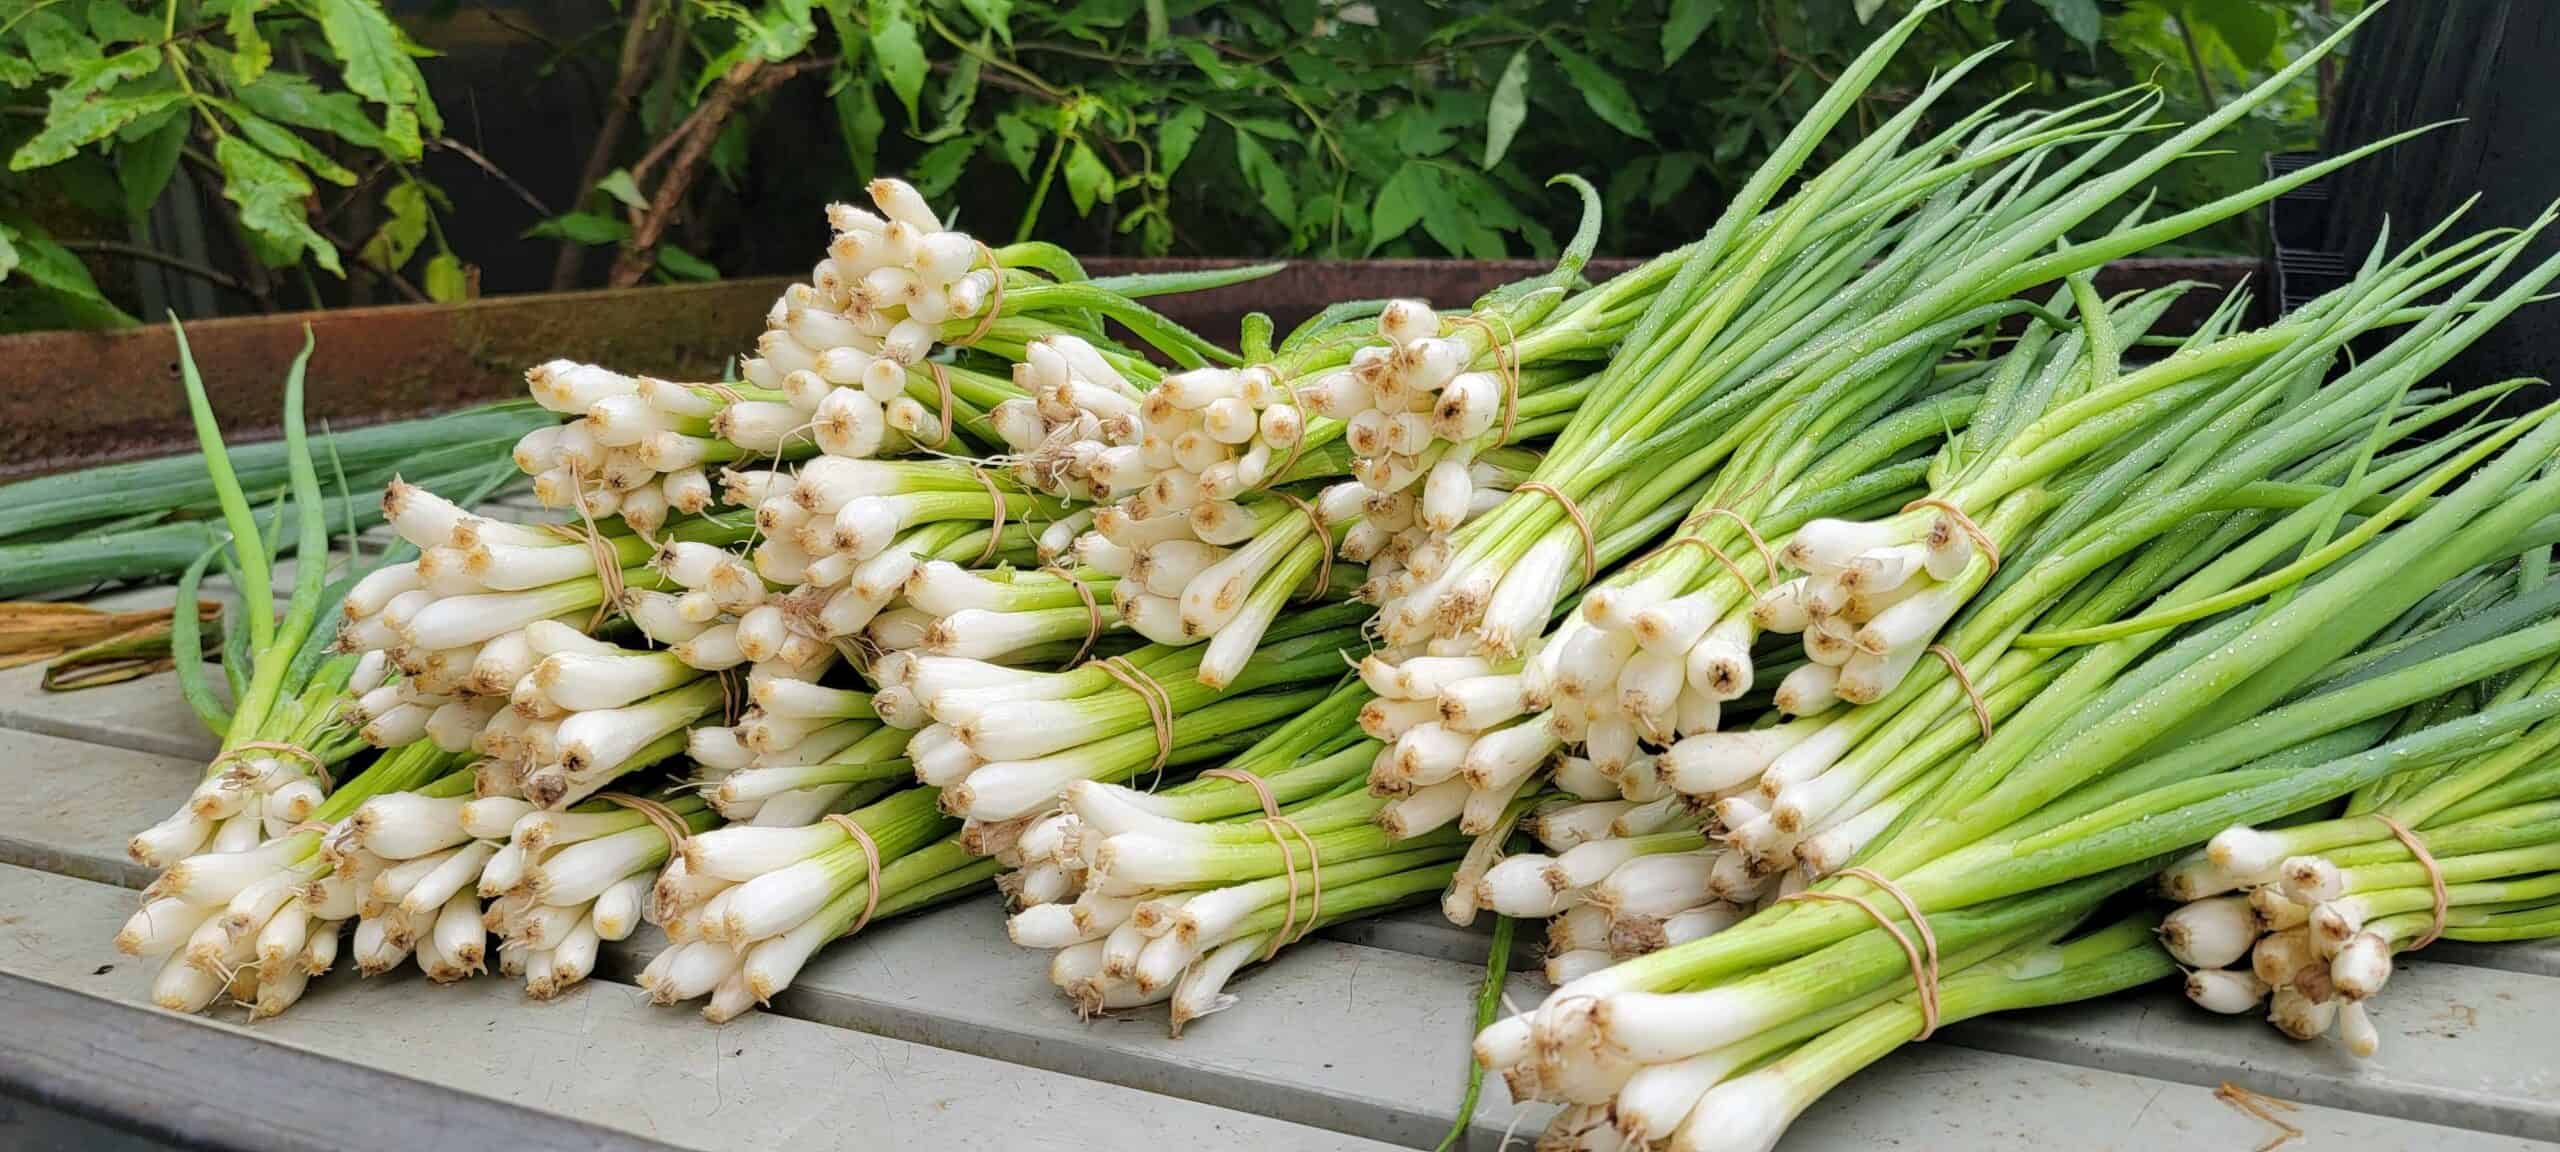 Bunches of spring onions.